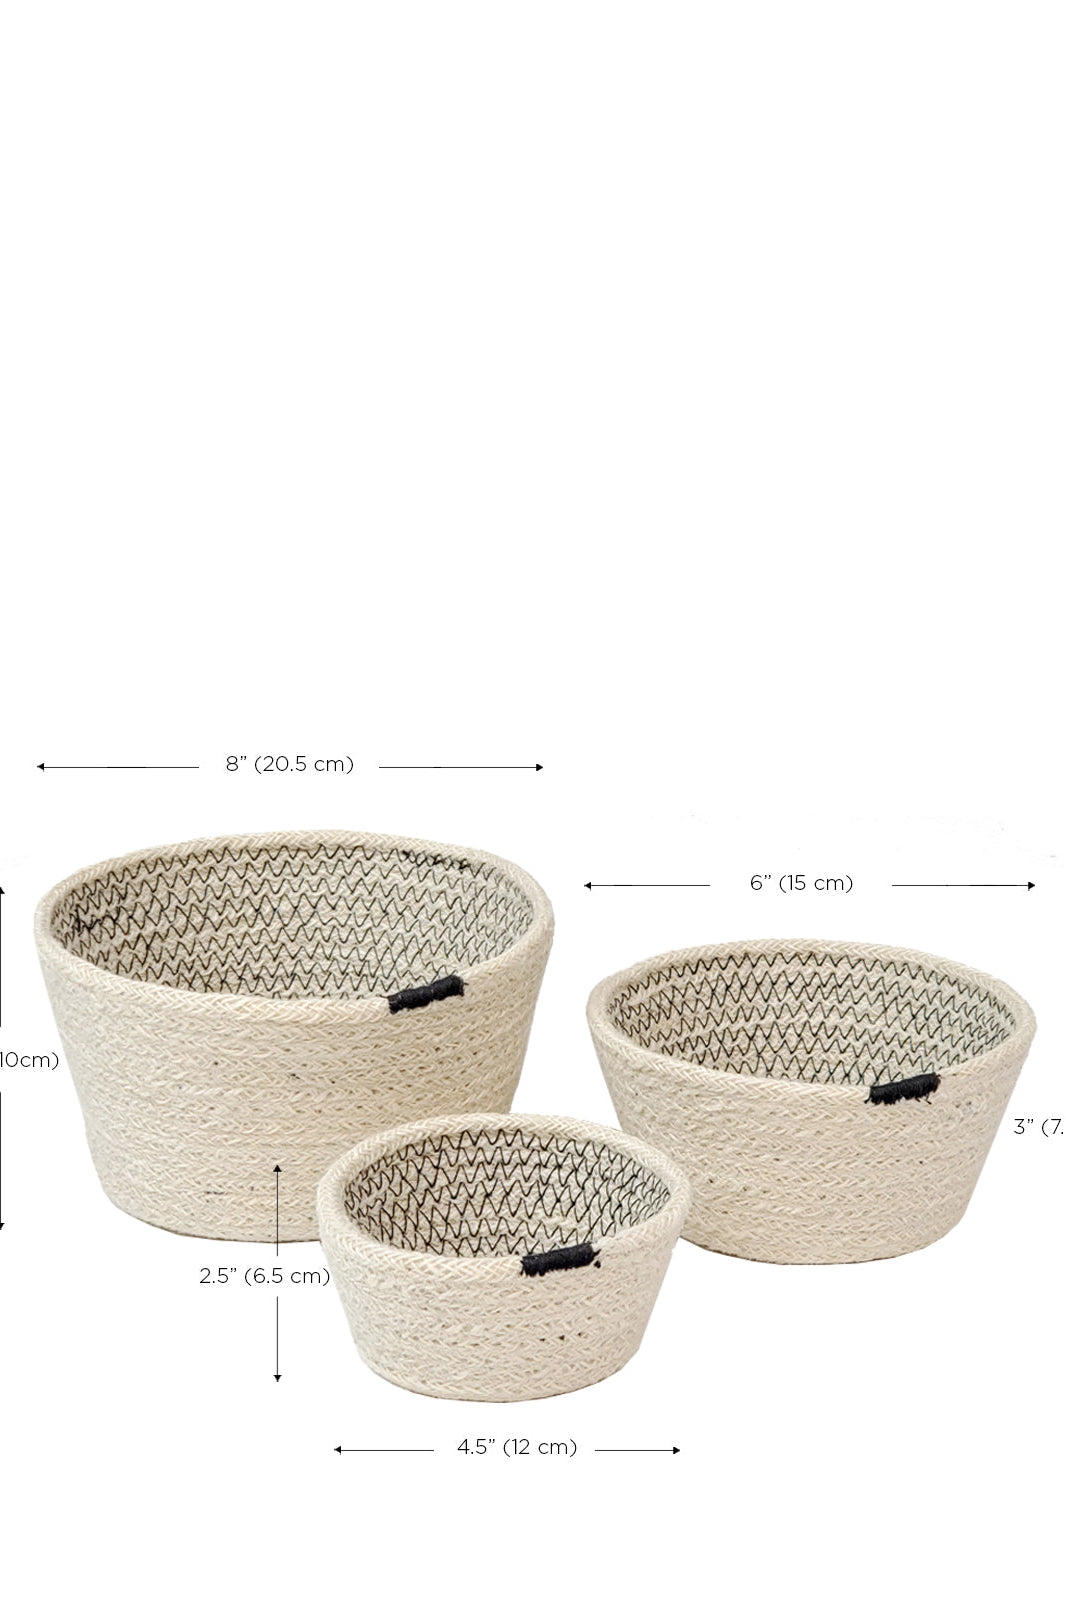 Amari Bowl with Black Stitching (Set of 3) The Groovalution